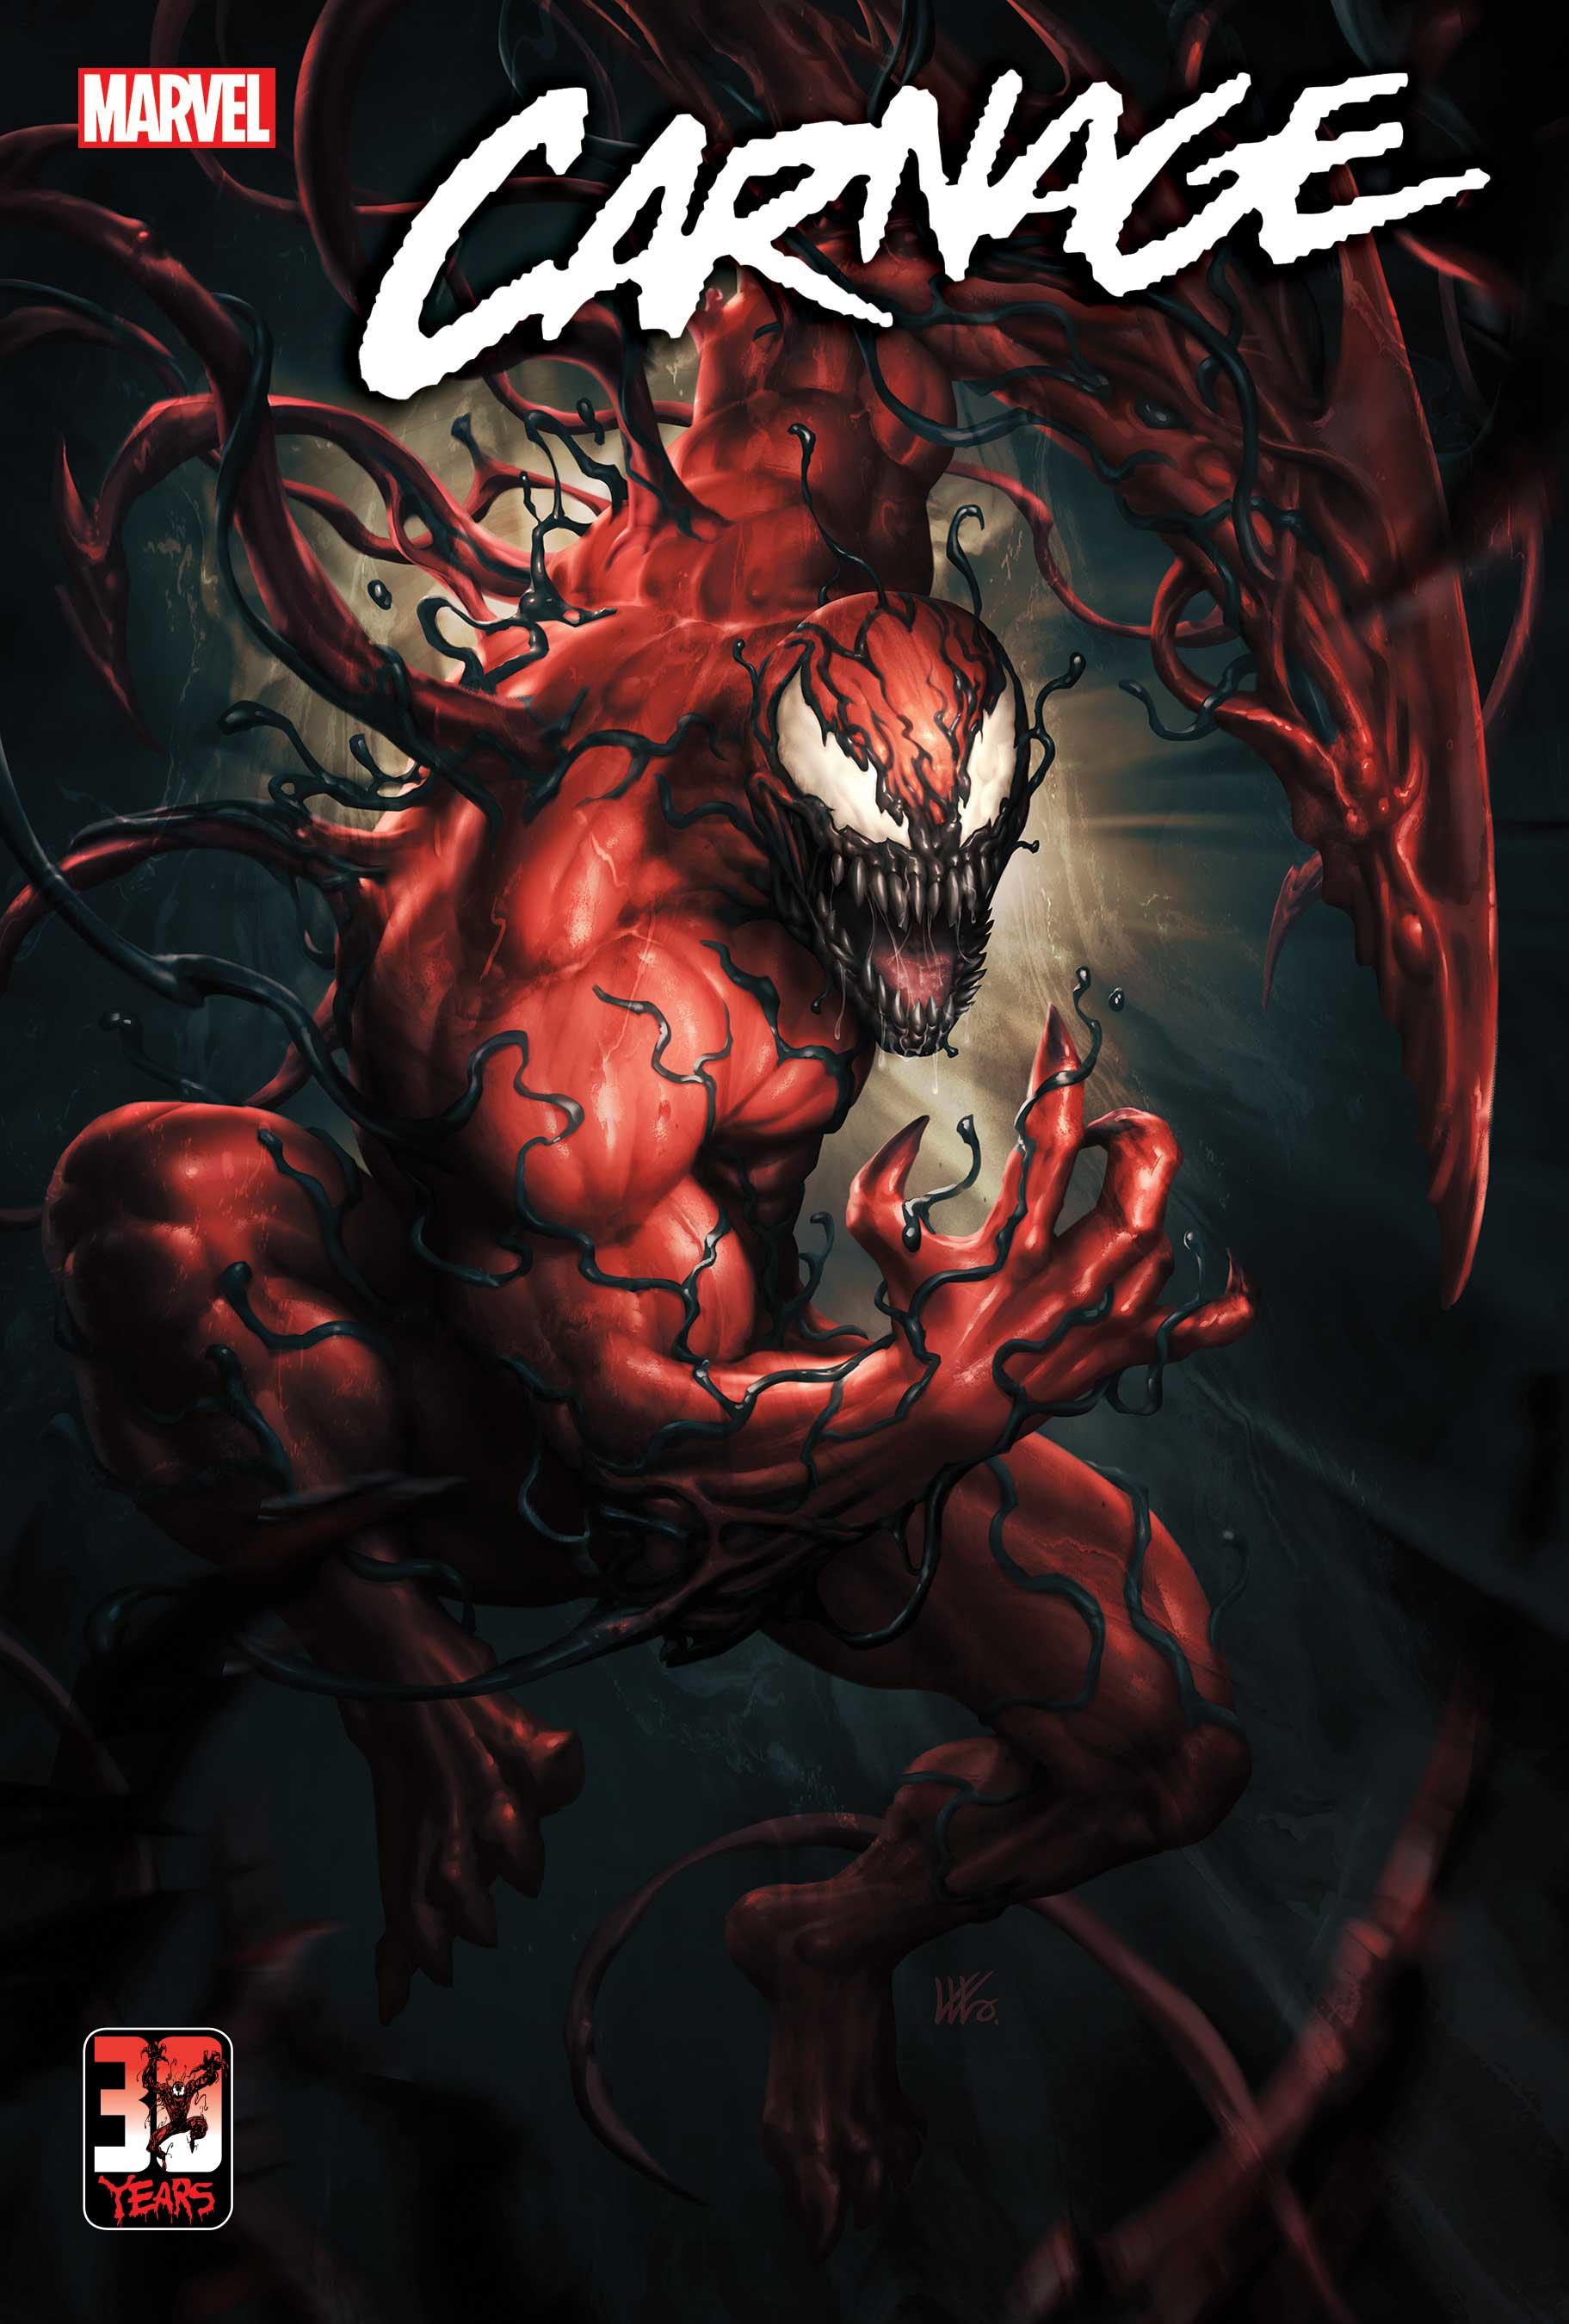 Marvel Announces New Carnage Series